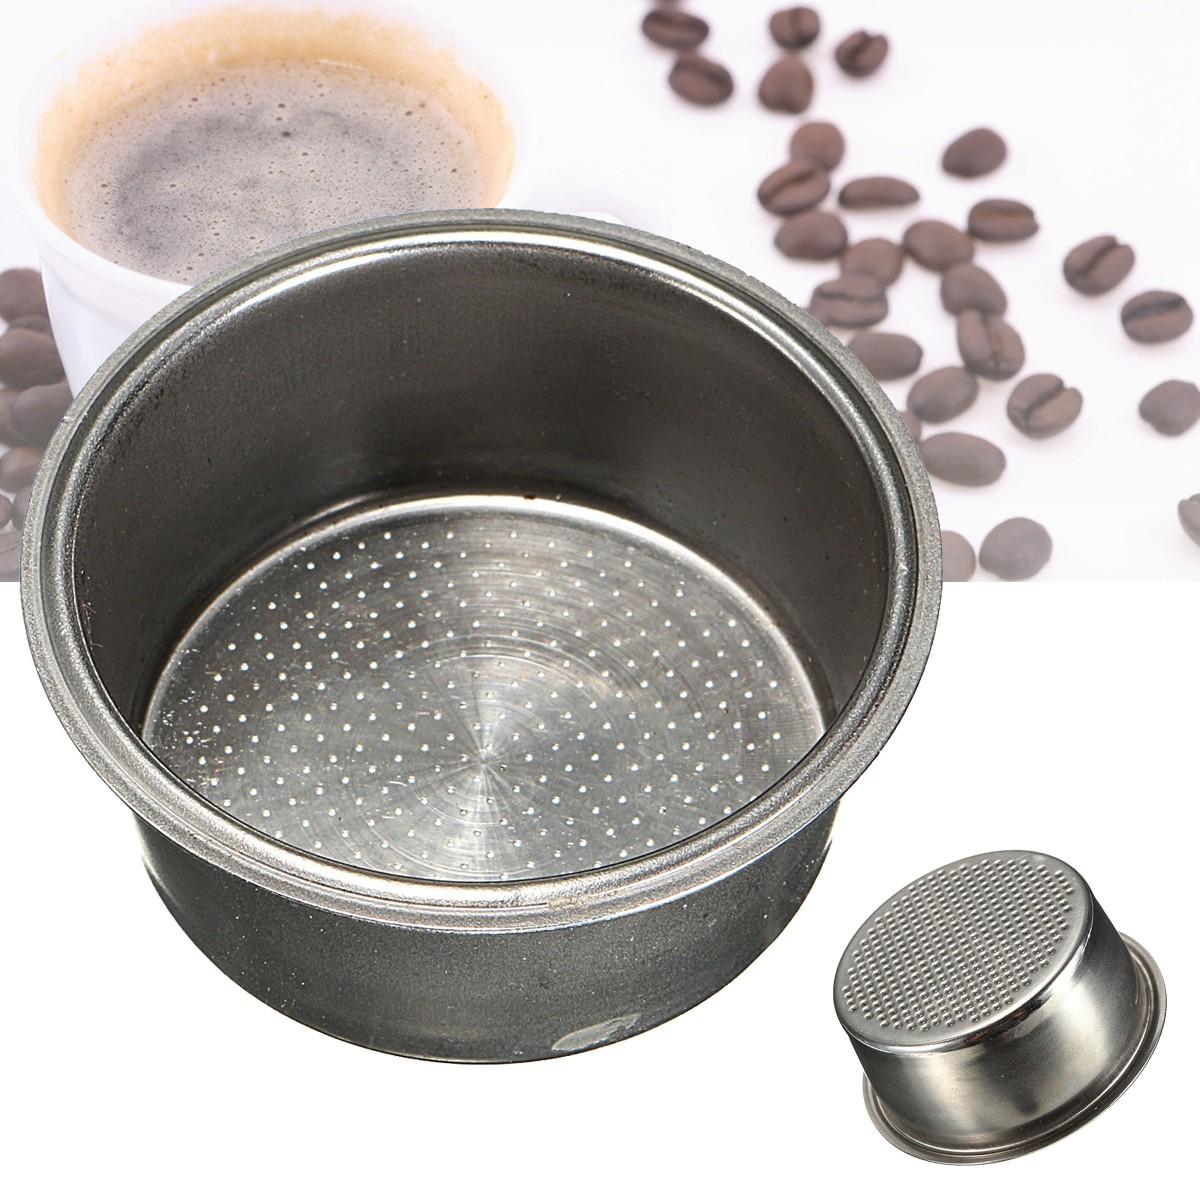 Dia 51mm Stainless Steel Non Pressurized Filter Basket Reusable Coffee Filter For Coffee Machine